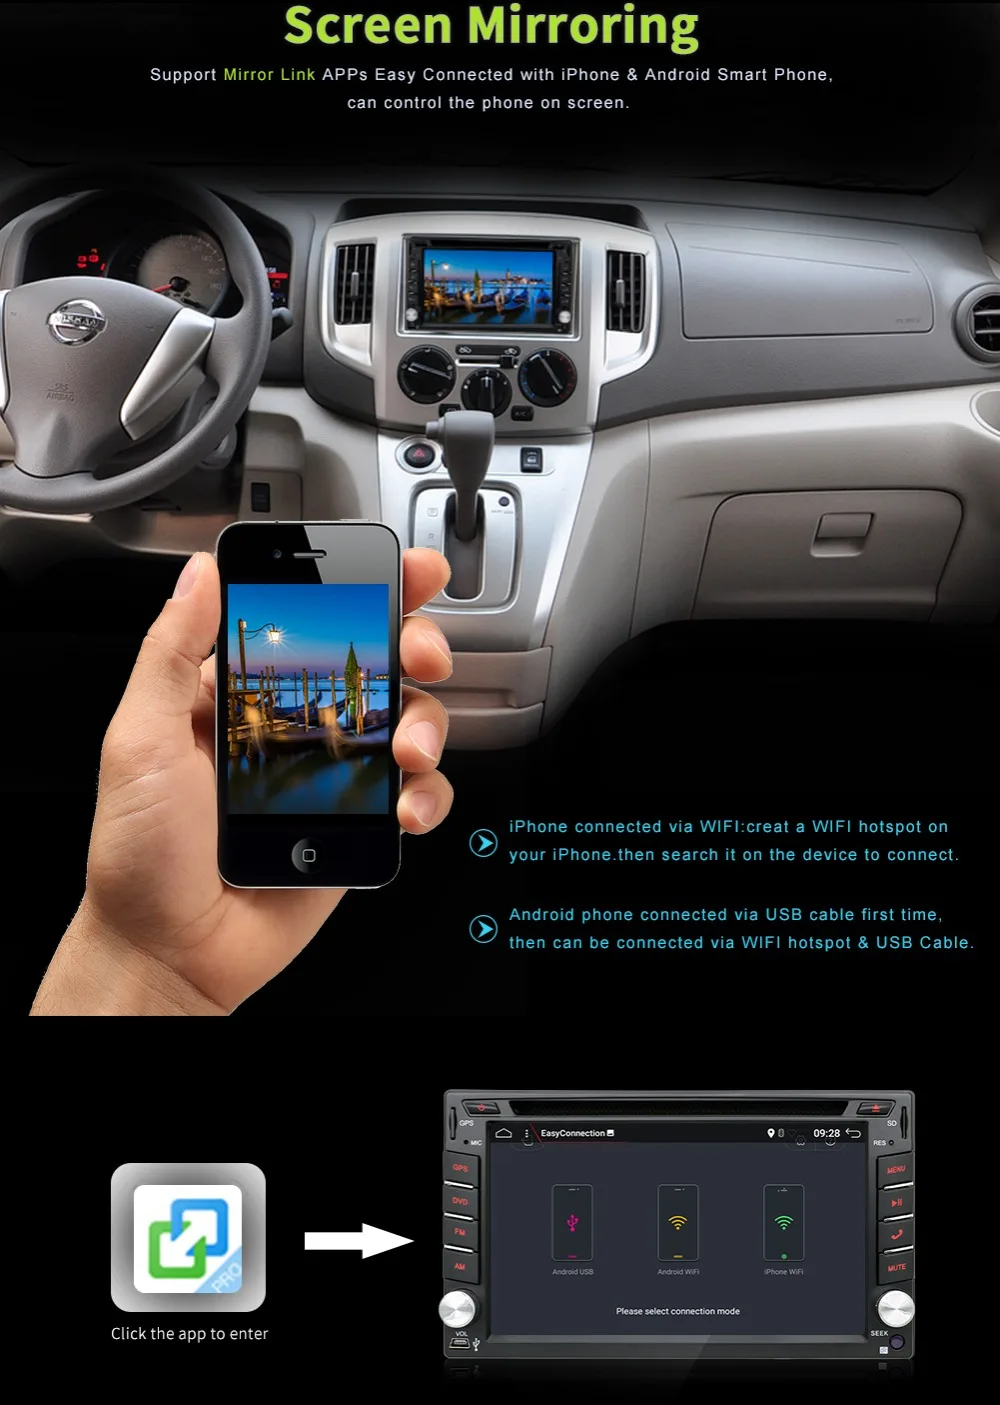 Flash Deal 2 din Car Radio Android 7.1 Car DVD player Stereo Multimedia GPS+Wifi+Bluetooth+Radio+USB+Quad Core Touch Screen Head Unit 13